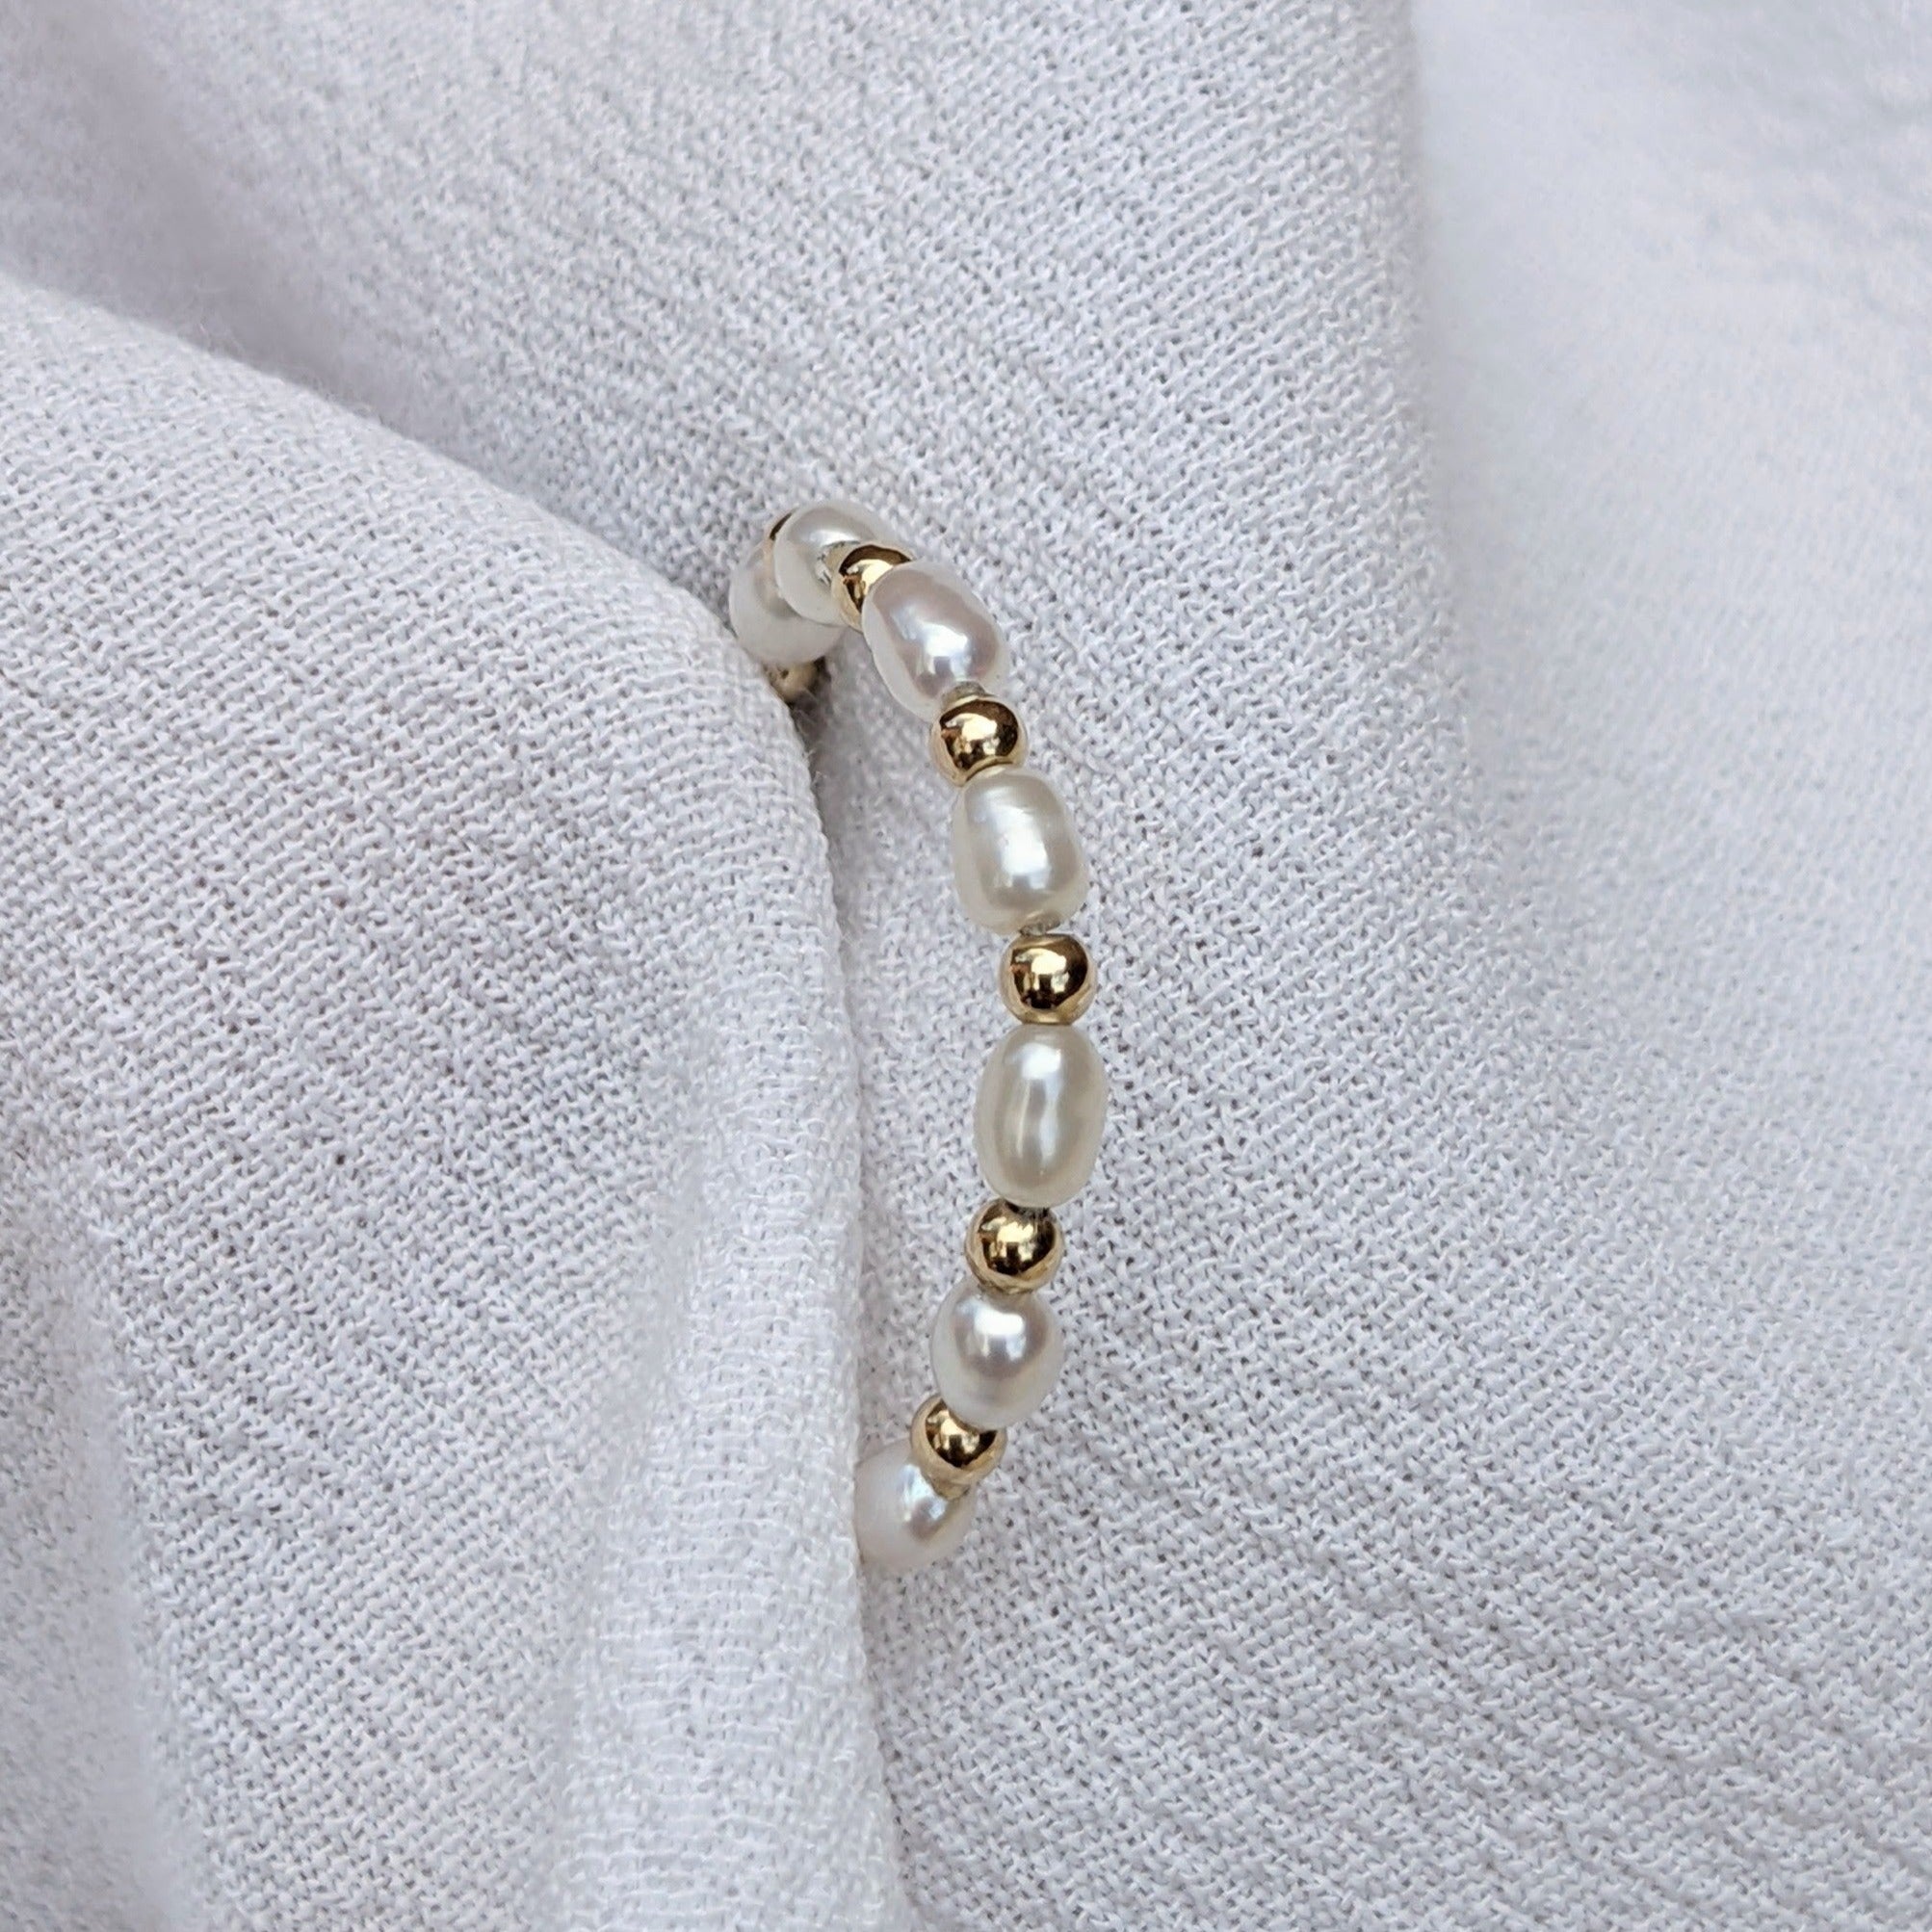 Seed pearl and gold bead ring held in white fabric